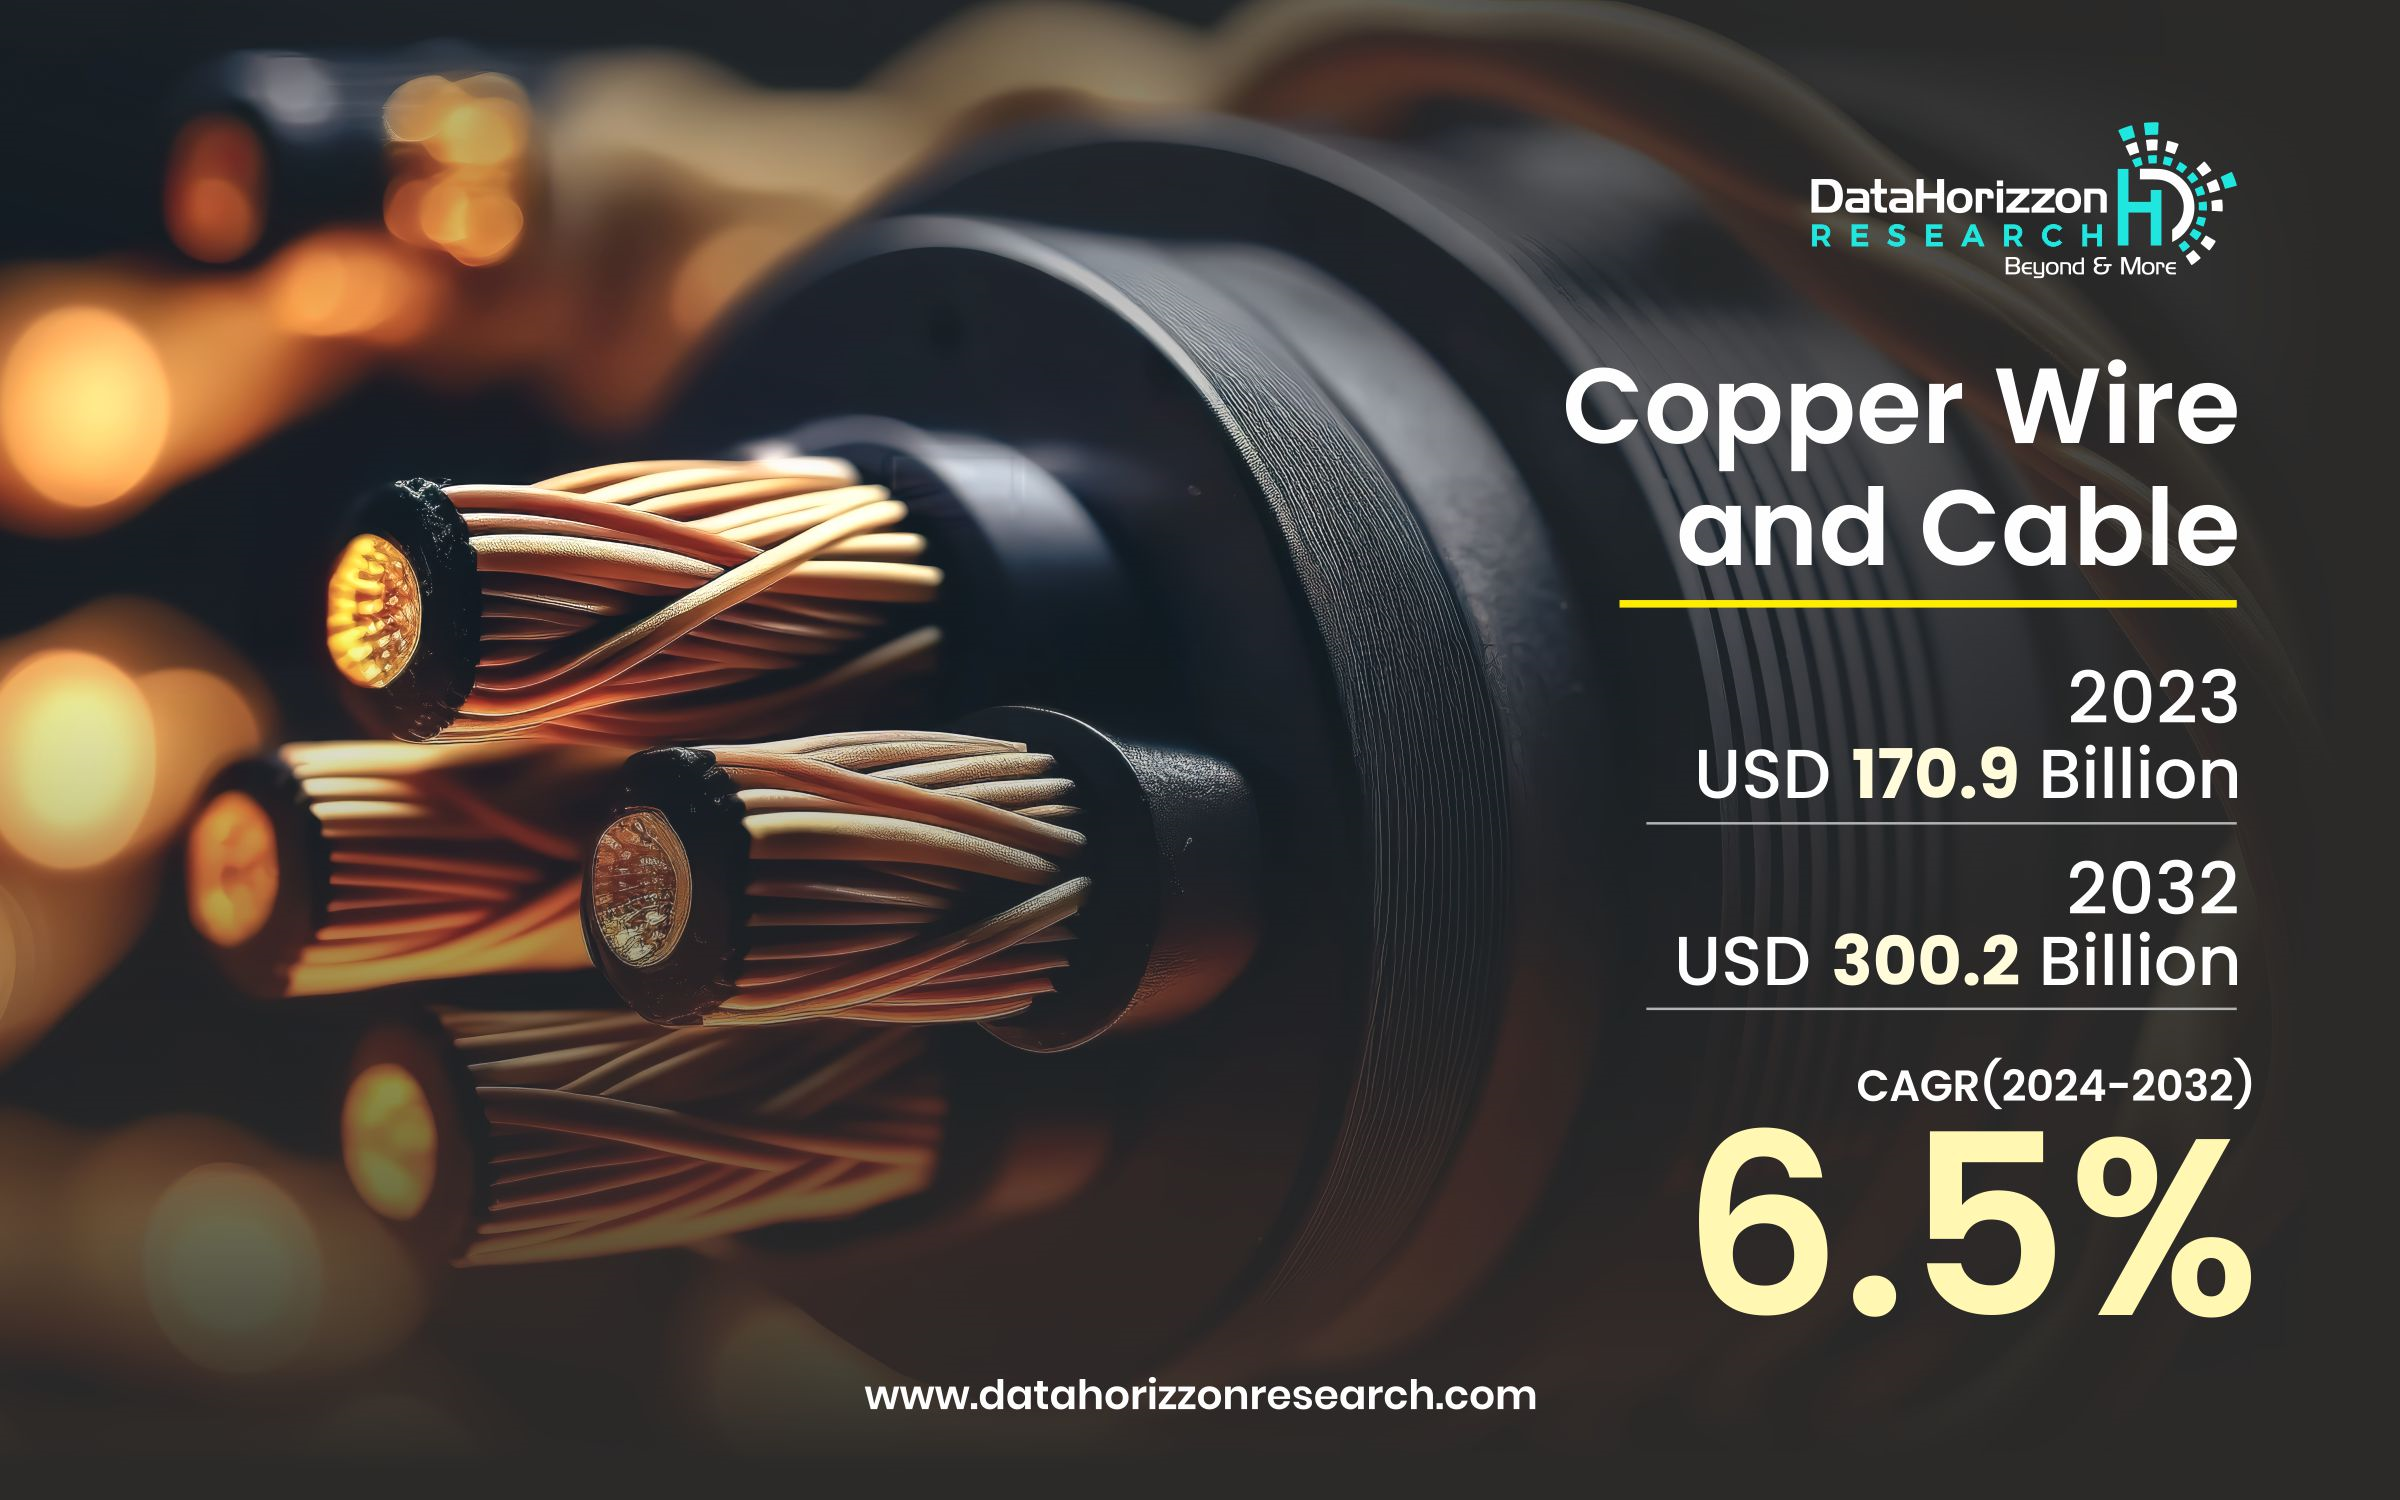 Copper Wire and Cable Market DataHorizzon Research